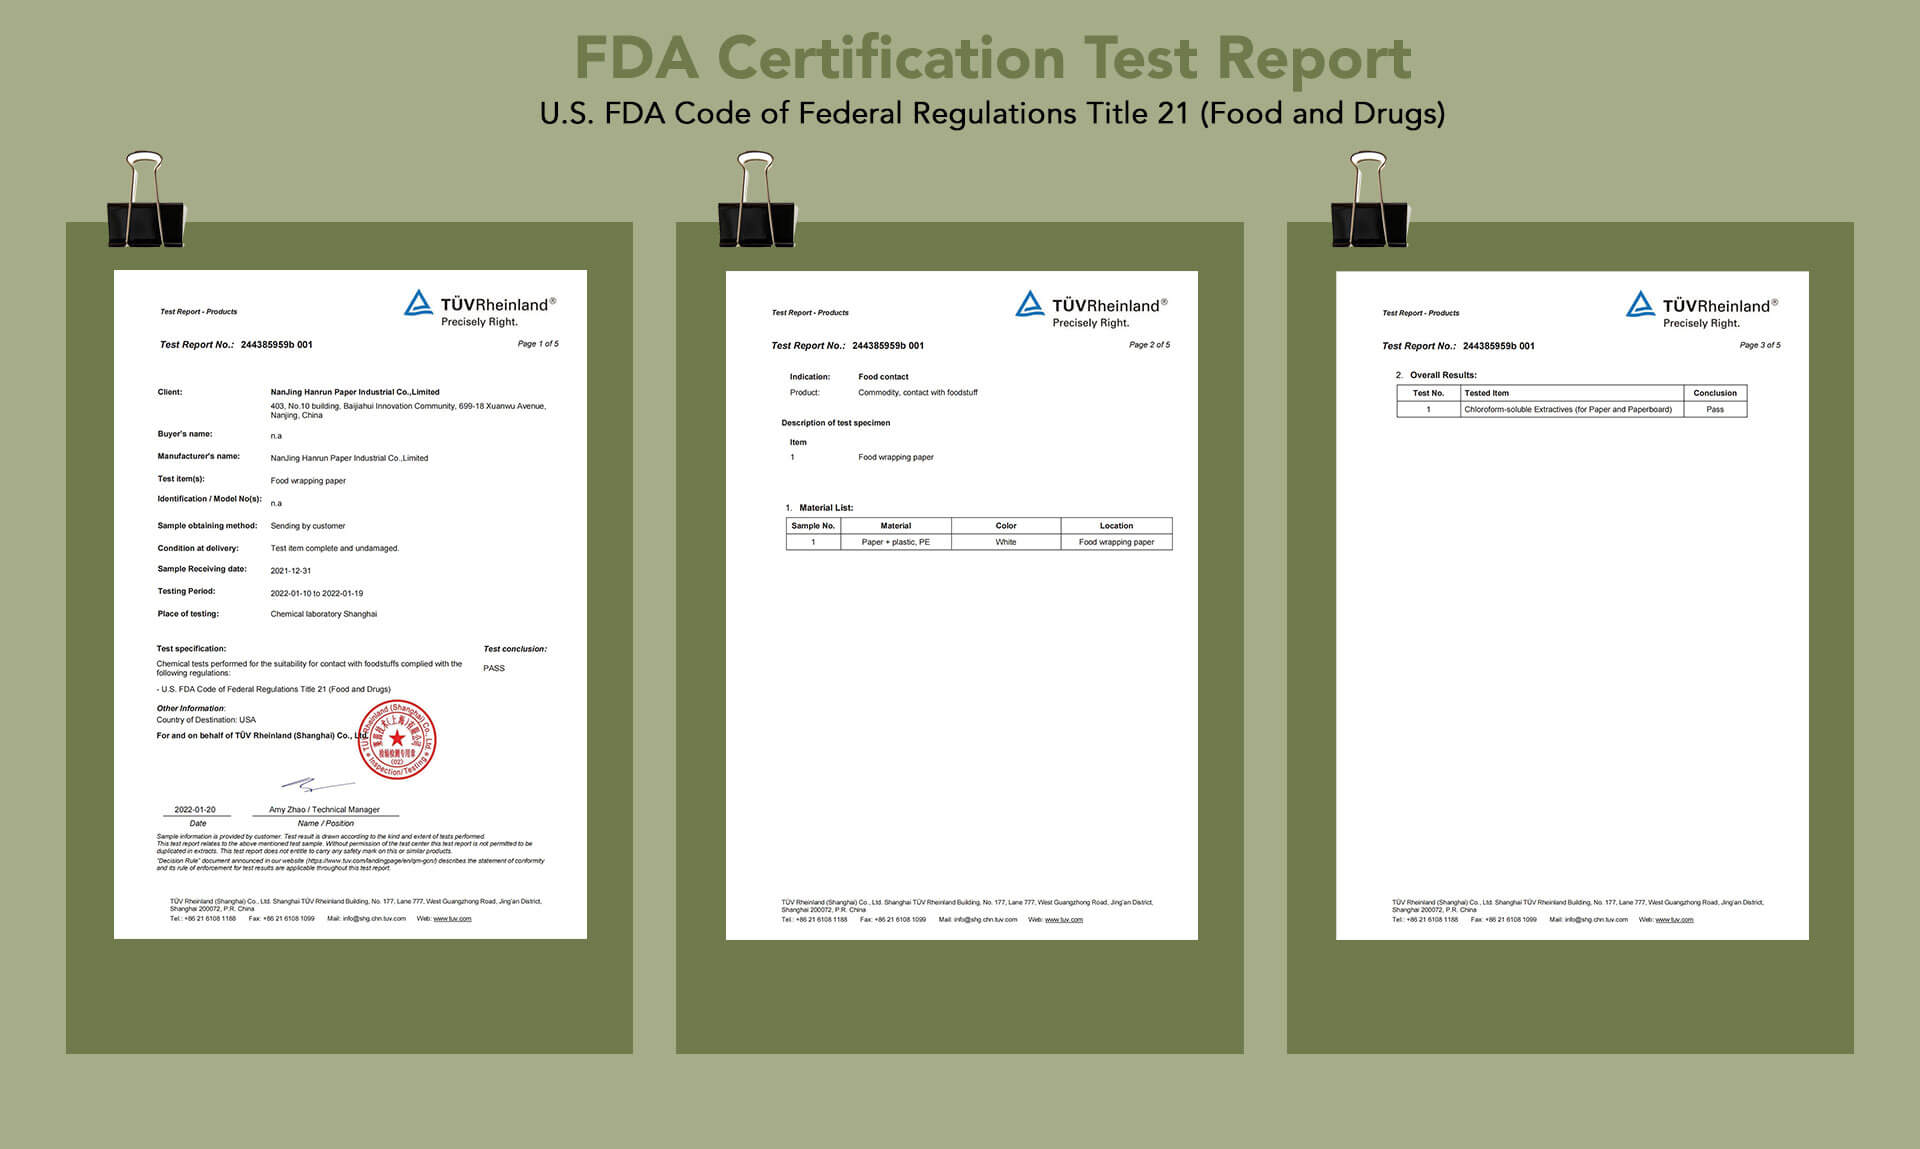 Nature paper FDA Certification Test Report U.S. FDA Code of Federal Regulations Title 21 (Food and Drugs)